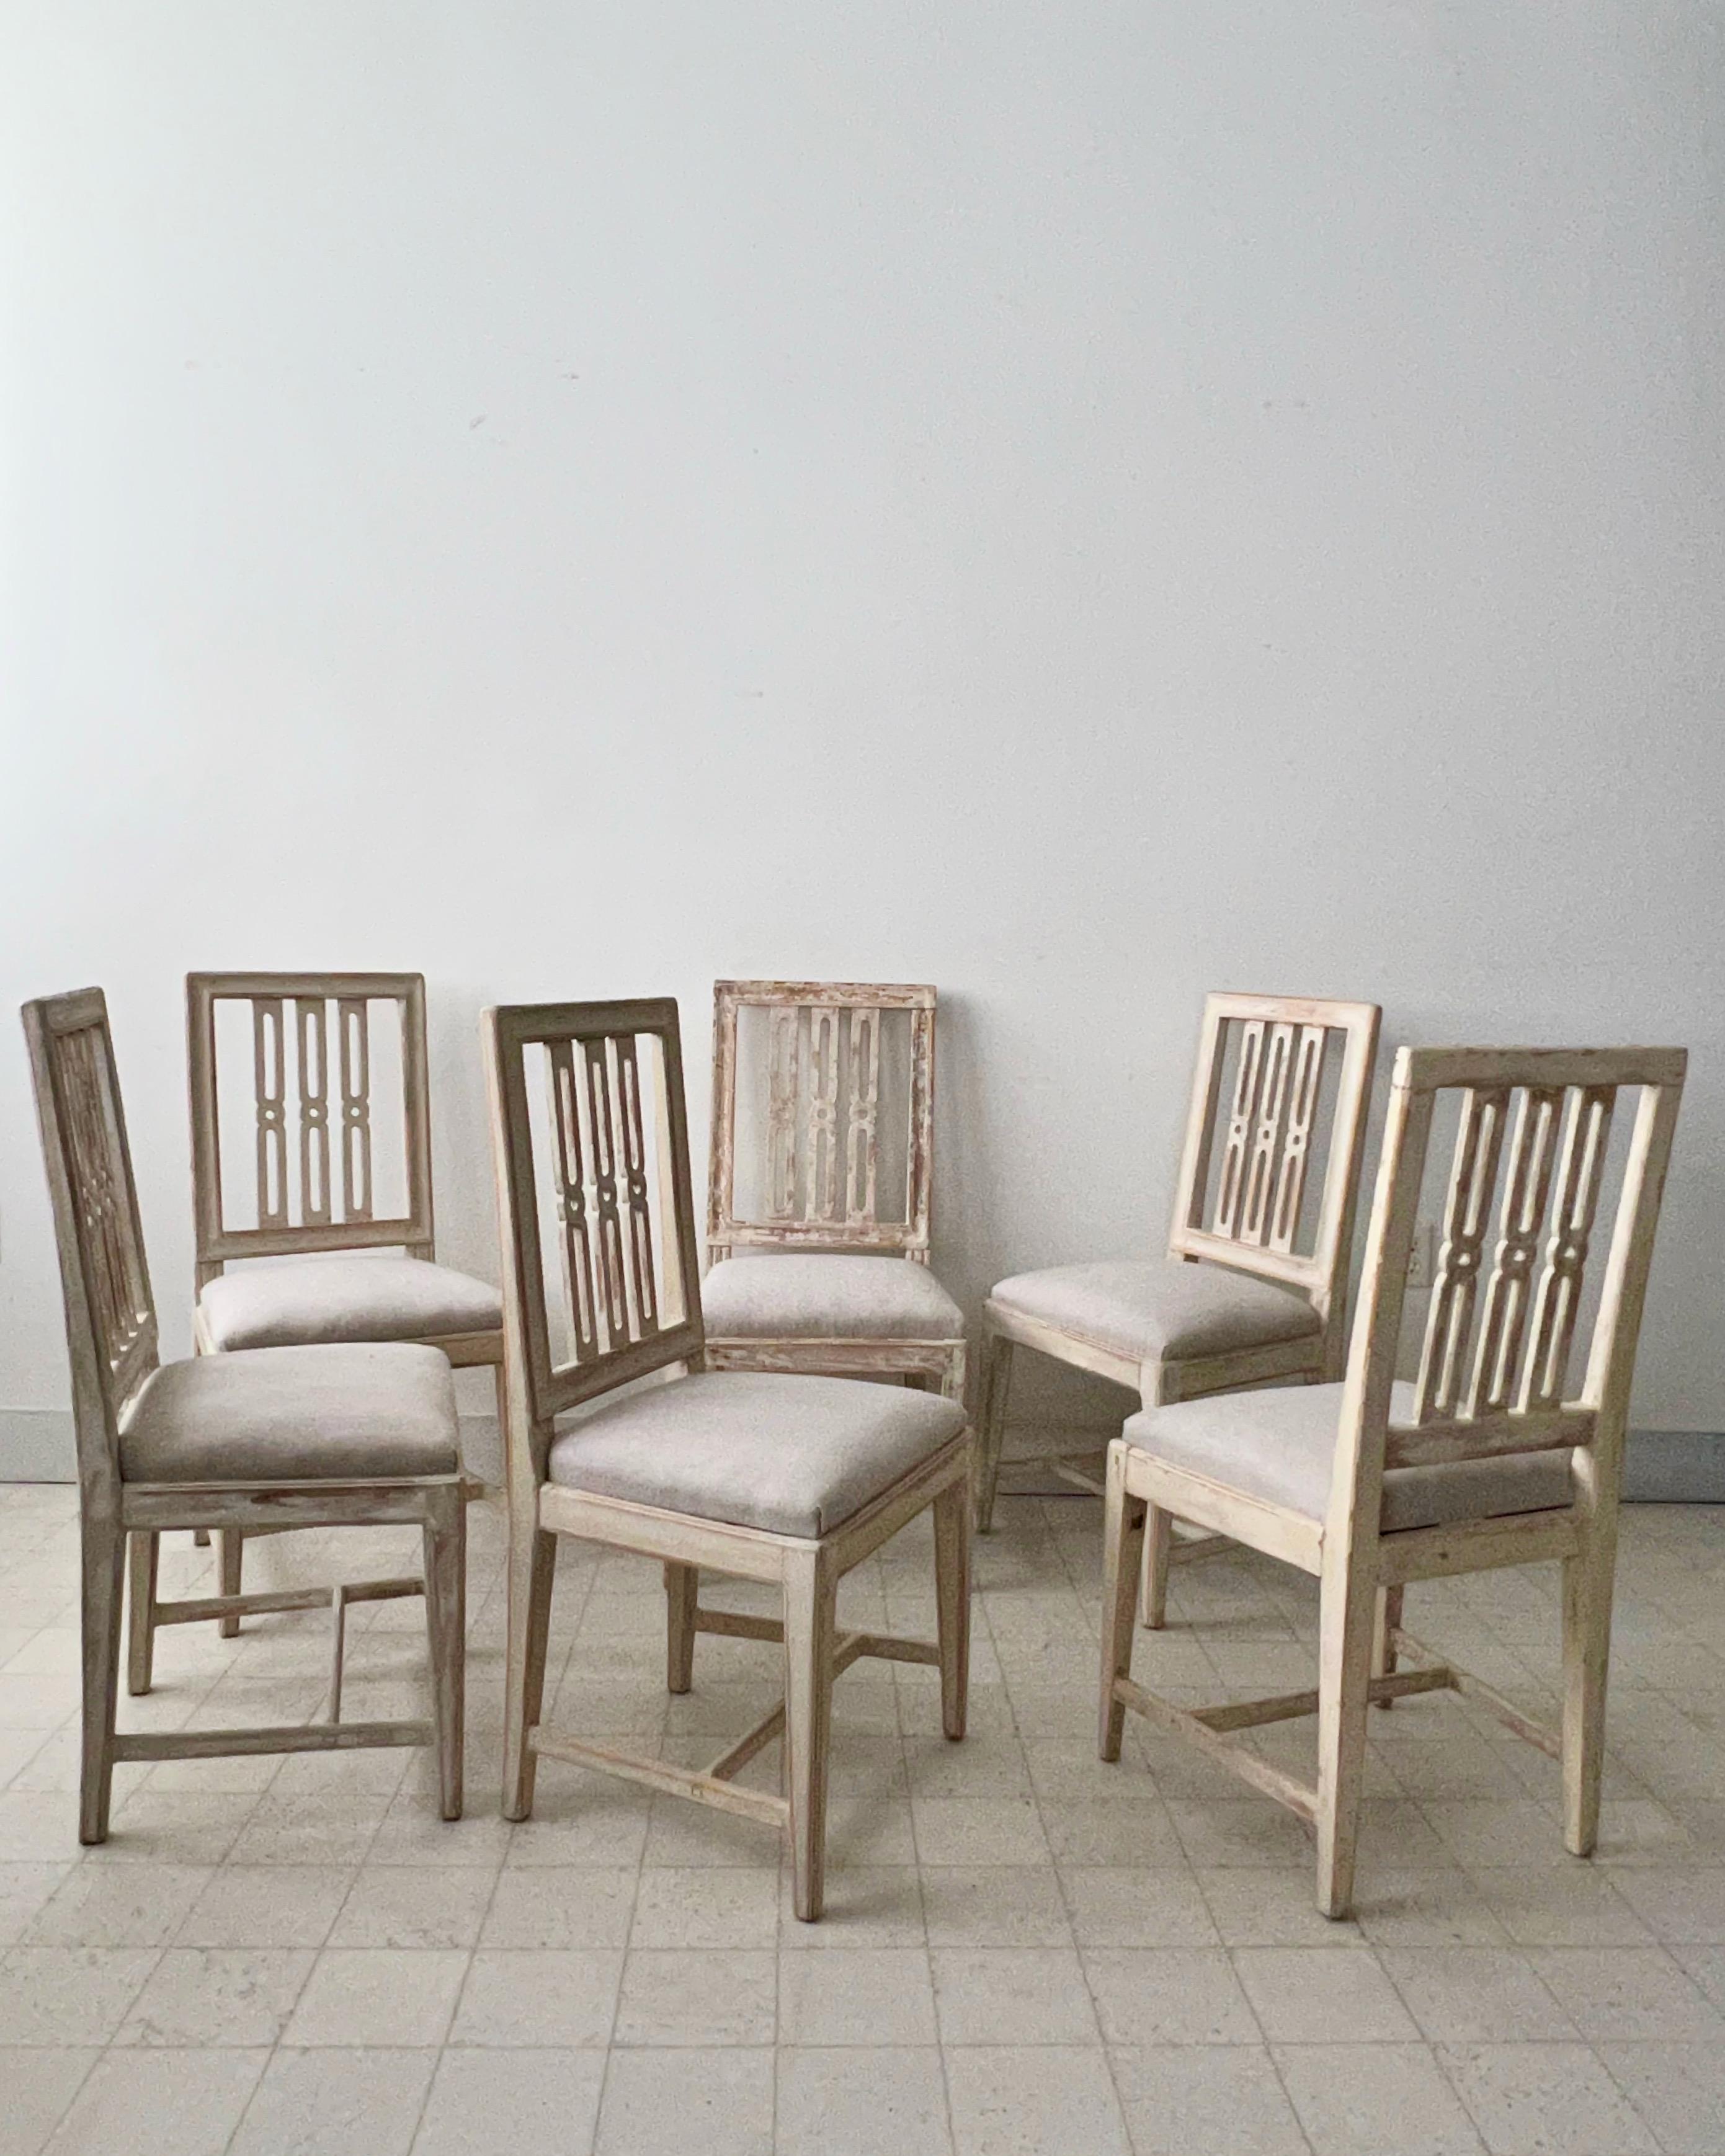 A set of six Swedish painted wood dining room side chairs from the late 19th century, with carved splats, tapering legs - slip seat cushions upholstered in linen.
Note:
Two chairs of these set are very slightly different - imperceptible, perhaps a